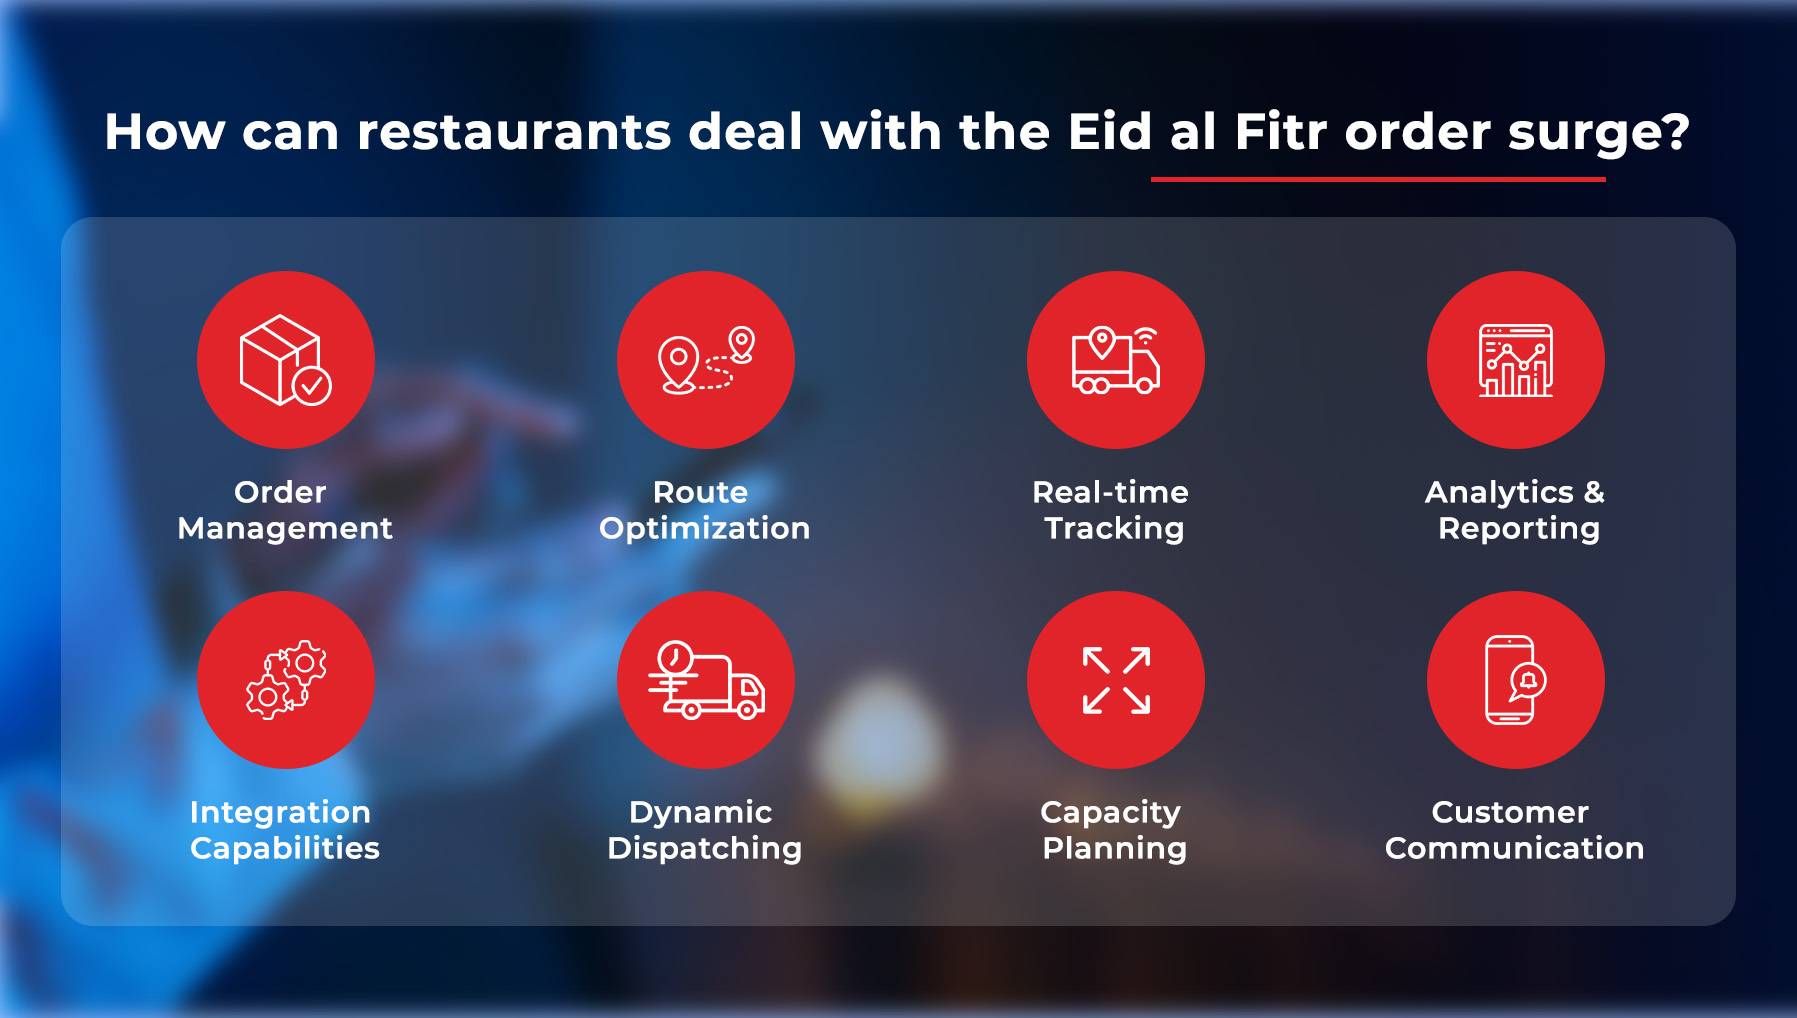 How can restaurants deal with the Eid al Fitr order surge using delivery management system